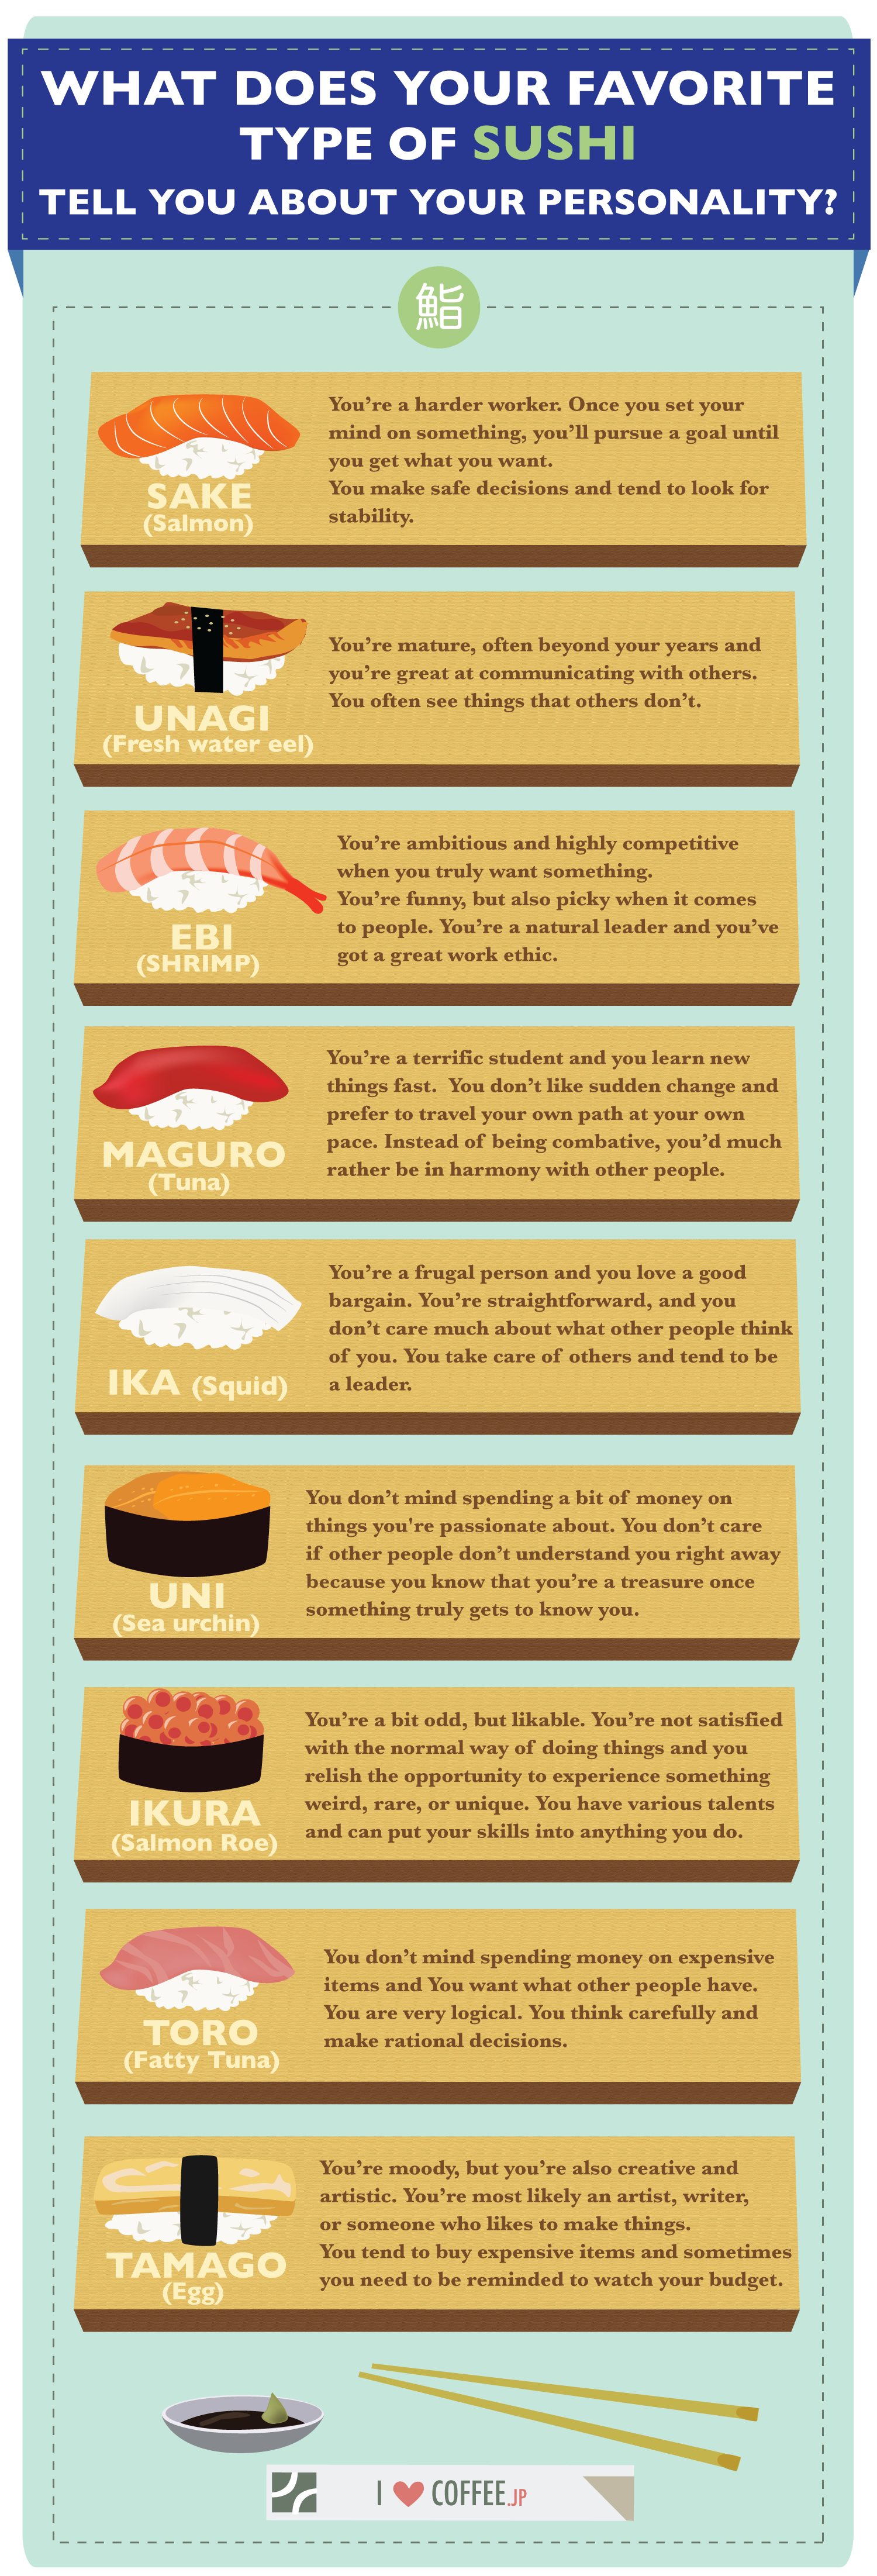 What Does Your Favorite Type of Sushi Tell About Your Personality